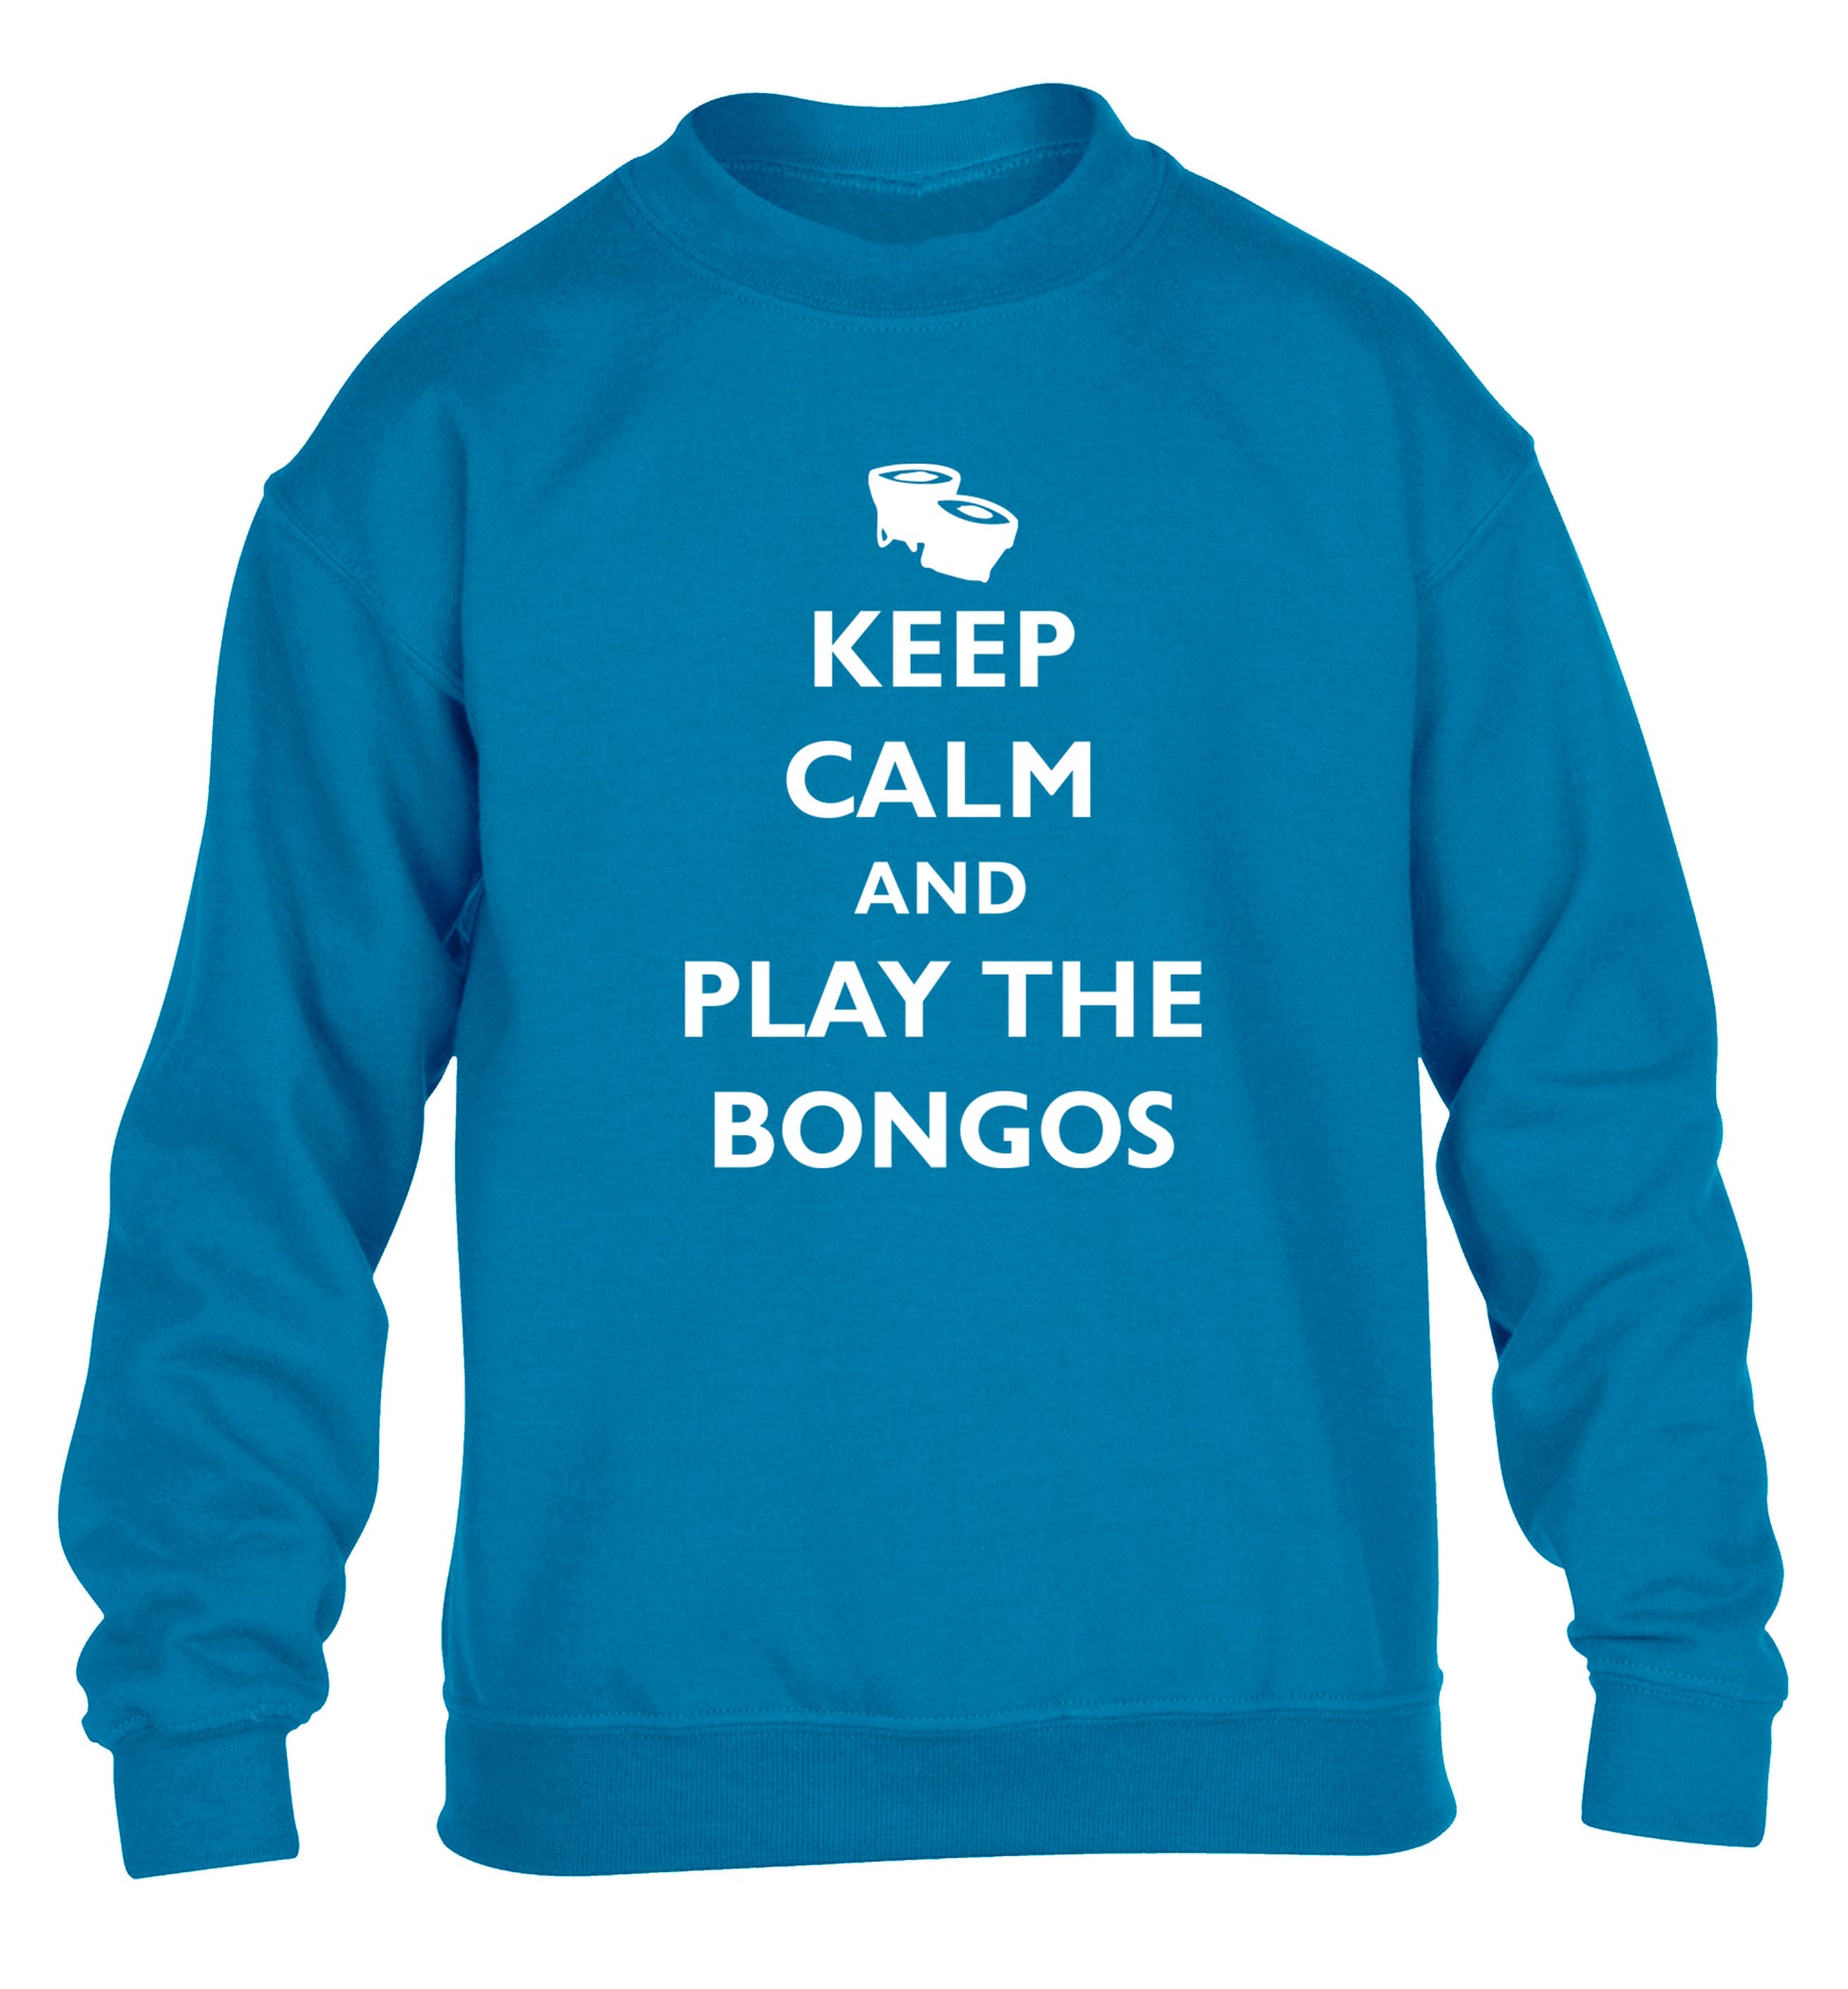 Keep calm and play the bongos children's blue sweater 12-14 Years